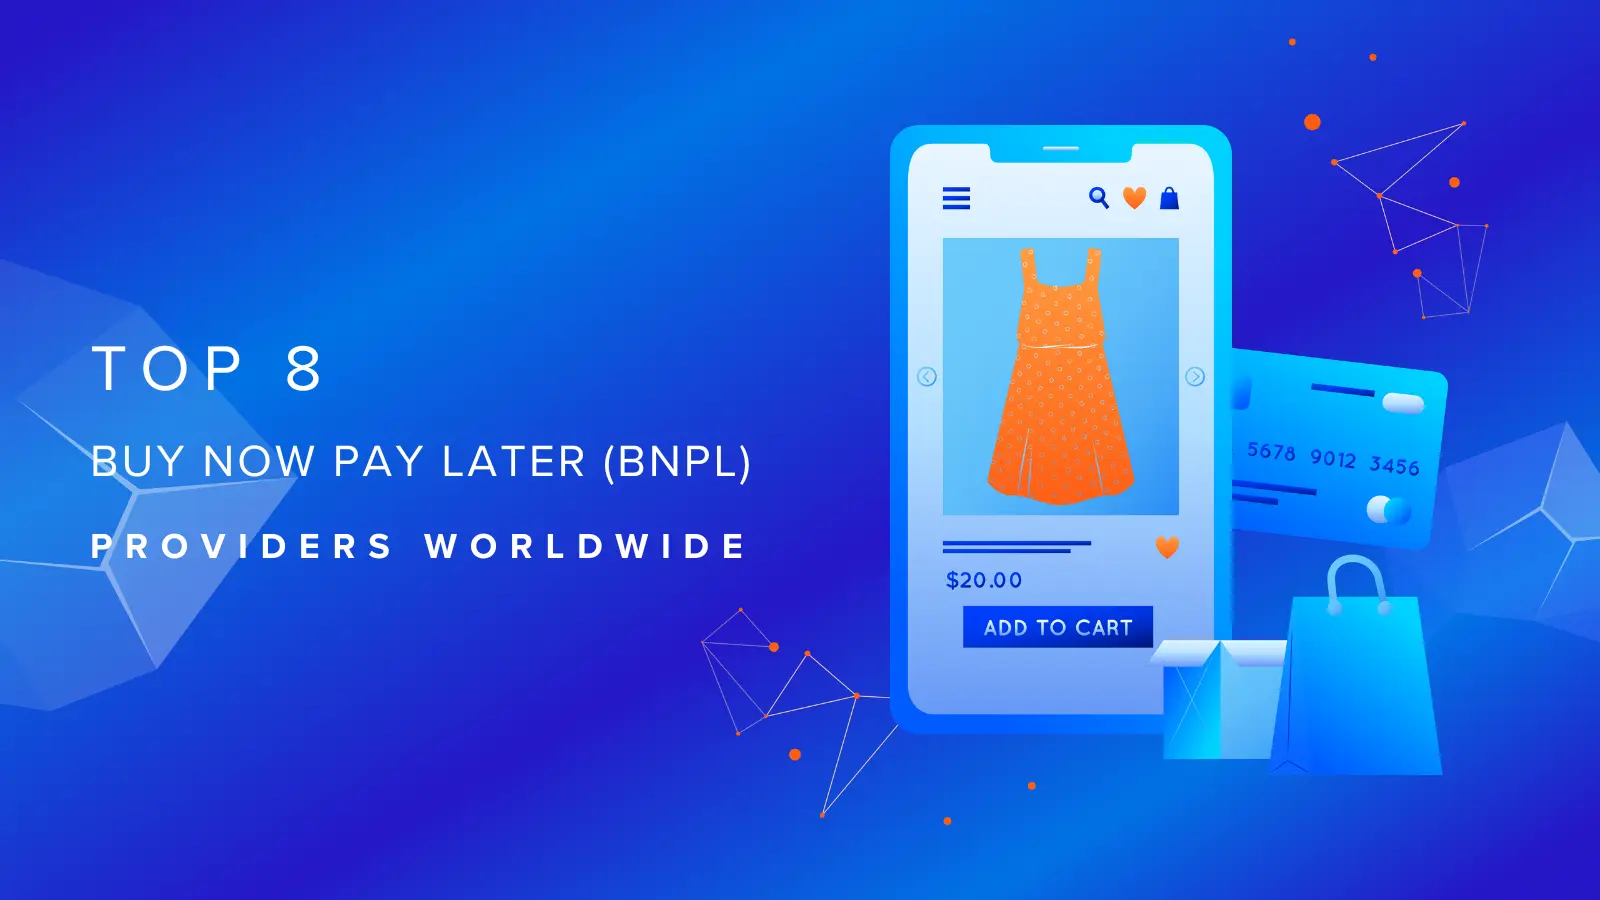 Top 8 Buy Now Pay Later (BNPL) Providers Worldwide